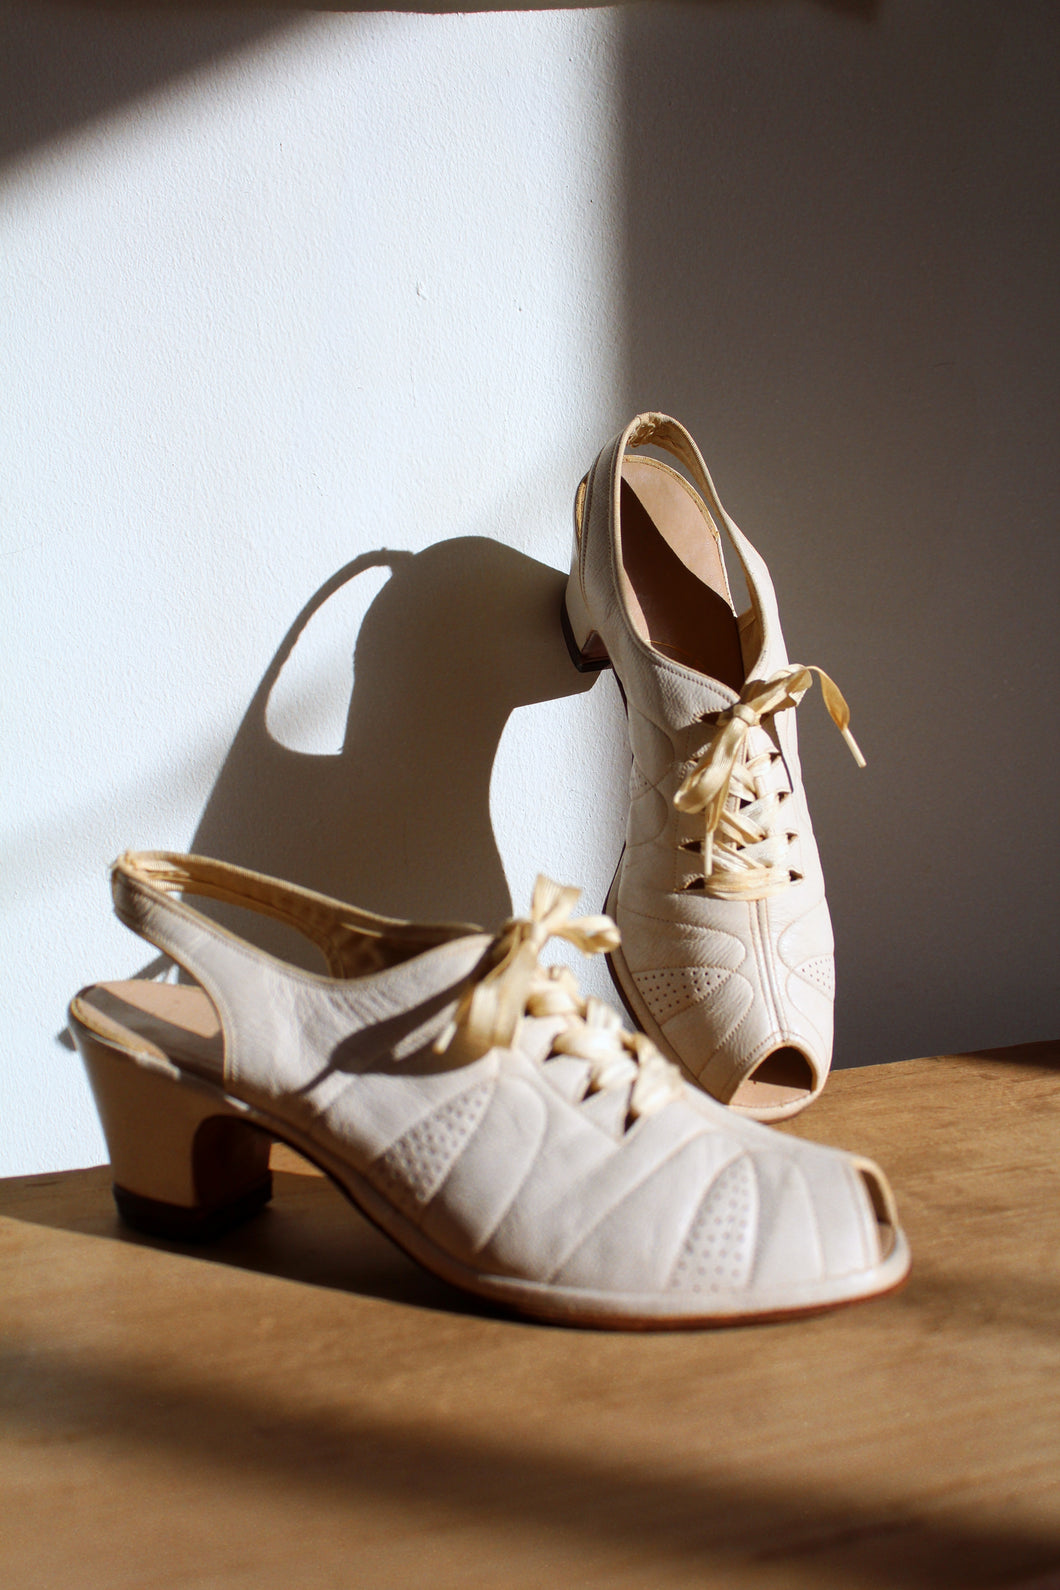 1940s White Quilted Leather Lace Up Heels - Size 7